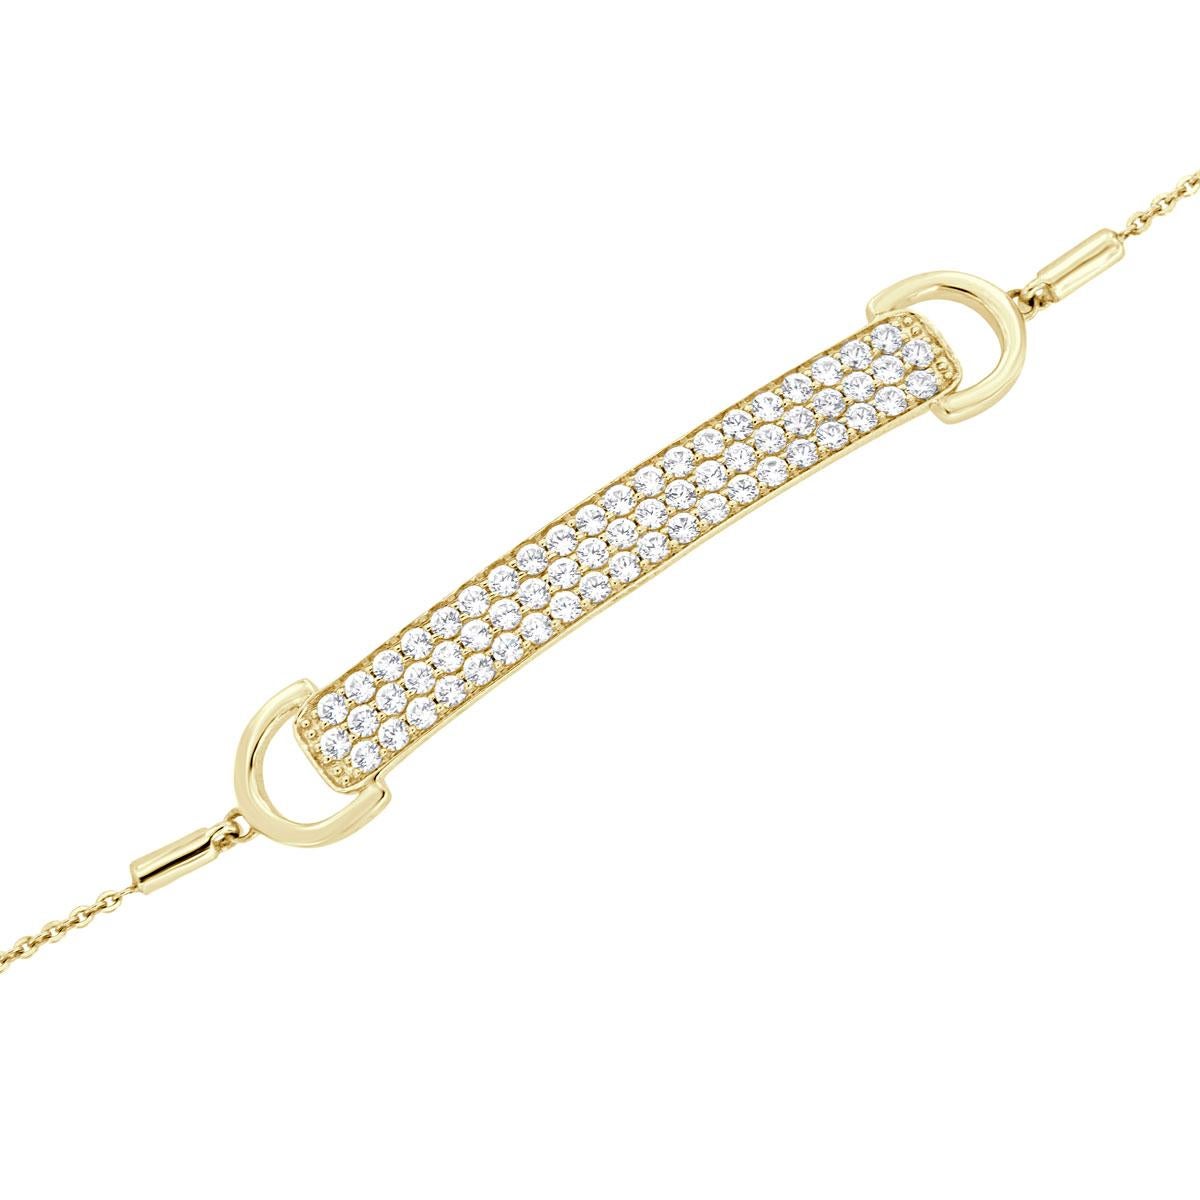 This stunning adjustable bolo-style bracelet features round brilliant diamonds micro-prong-set. Experience the difference!

Product details: 

Center Gemstone Type: NATURAL DIAMOND
Center Gemstone Color: WHITE
Center Gemstone Shape: ROUND
Center